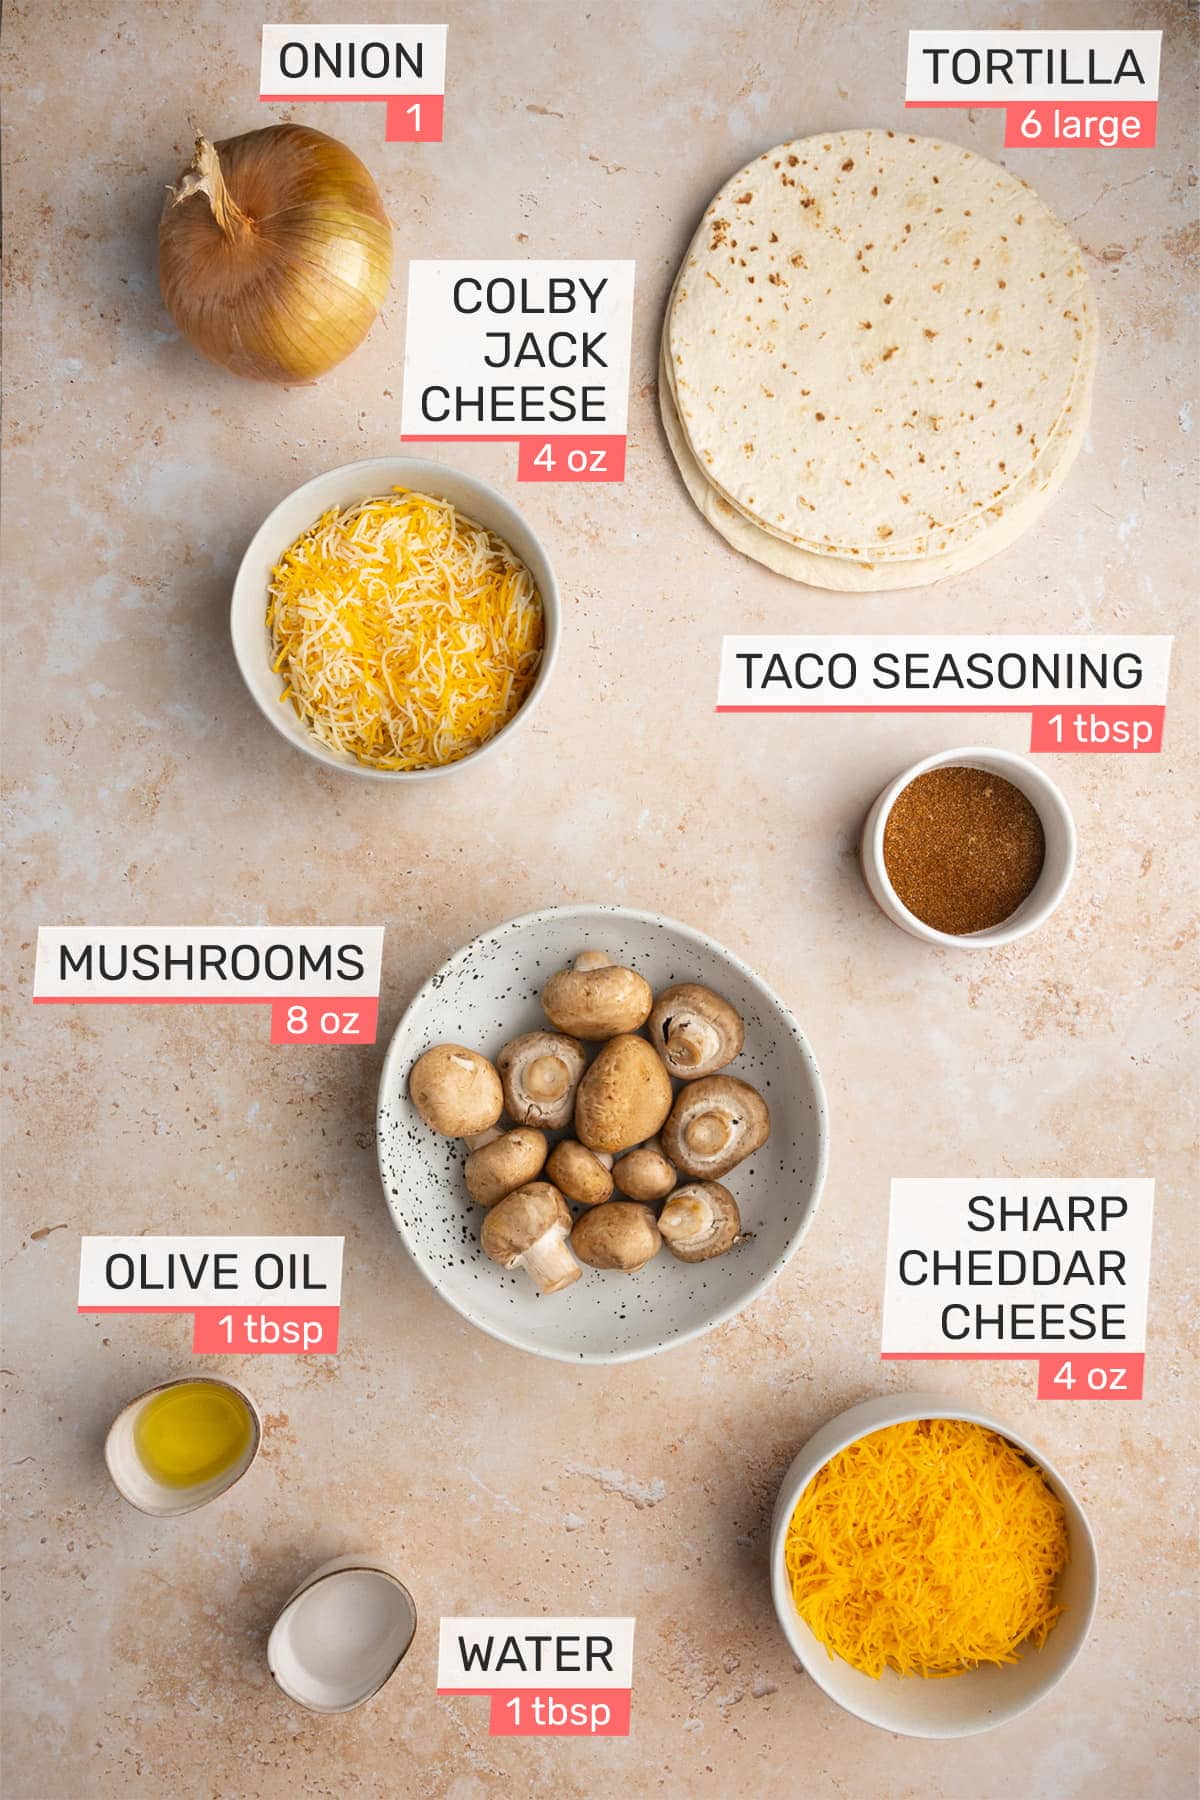 Overhead picture of all ingredients needed for Meatless Enchiladas - Onion, Colby Jack Cheese, Tortilla, Taco Seasoning, Mushrooms, Sharp Cheddar Cheese, Olive Oil, Water